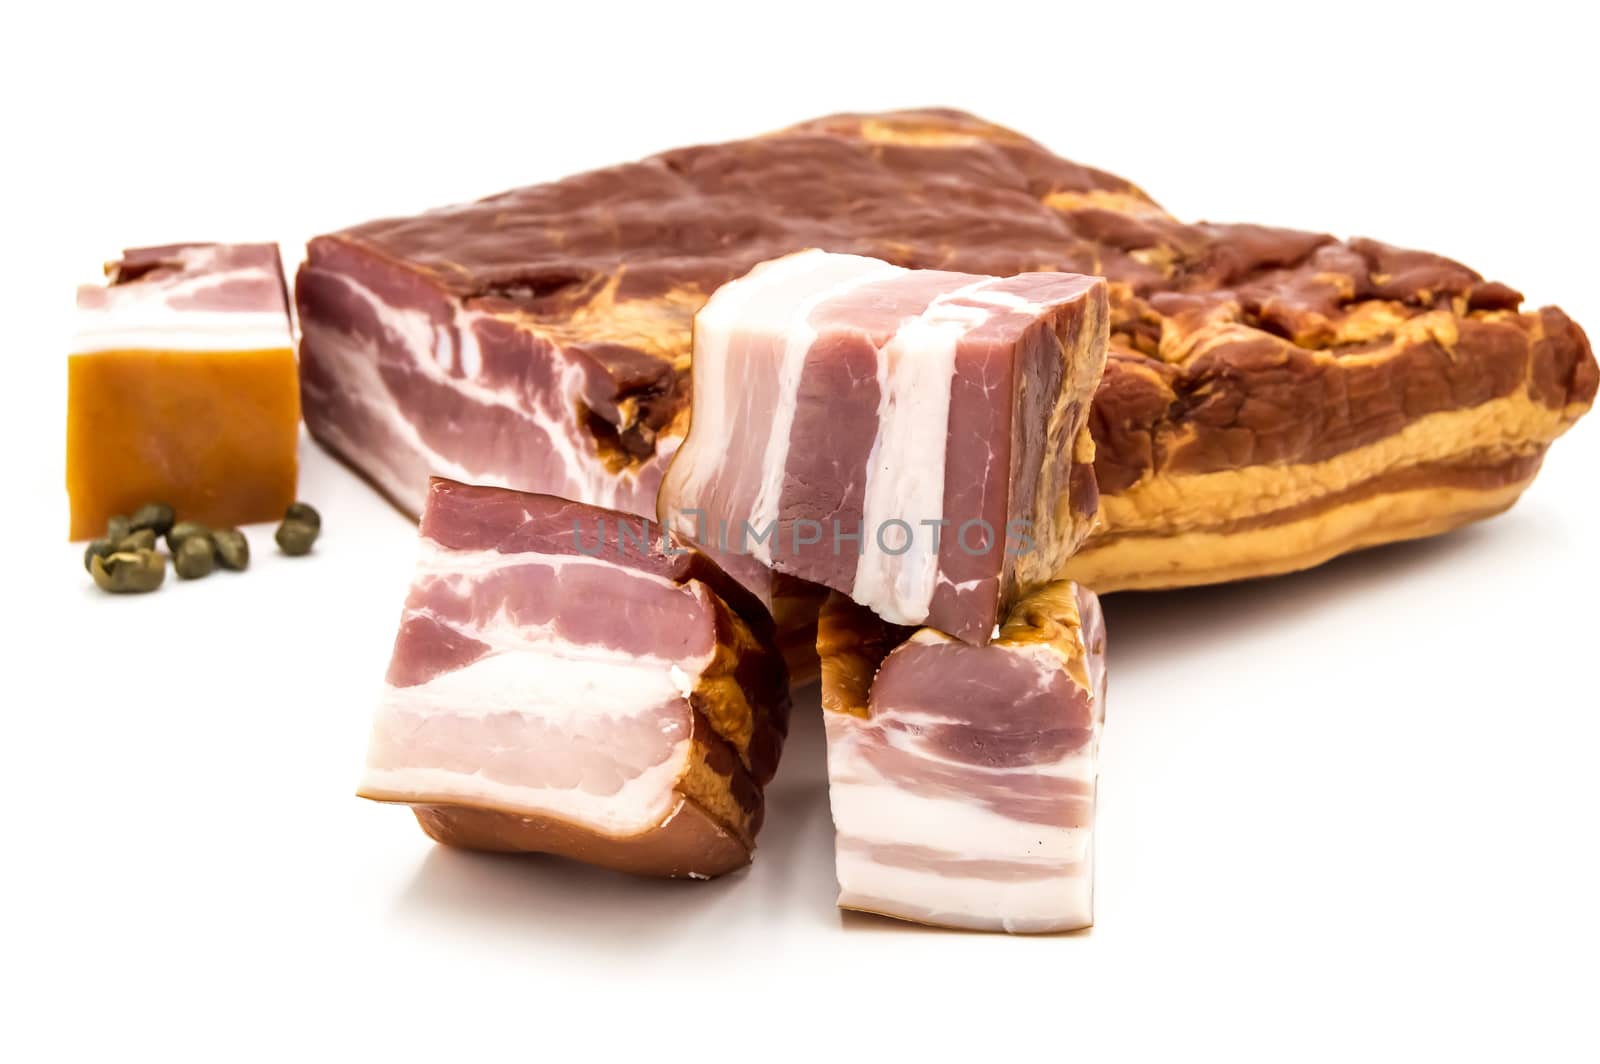 Piece of smoked bacon with meat and cubed  by Philou1000